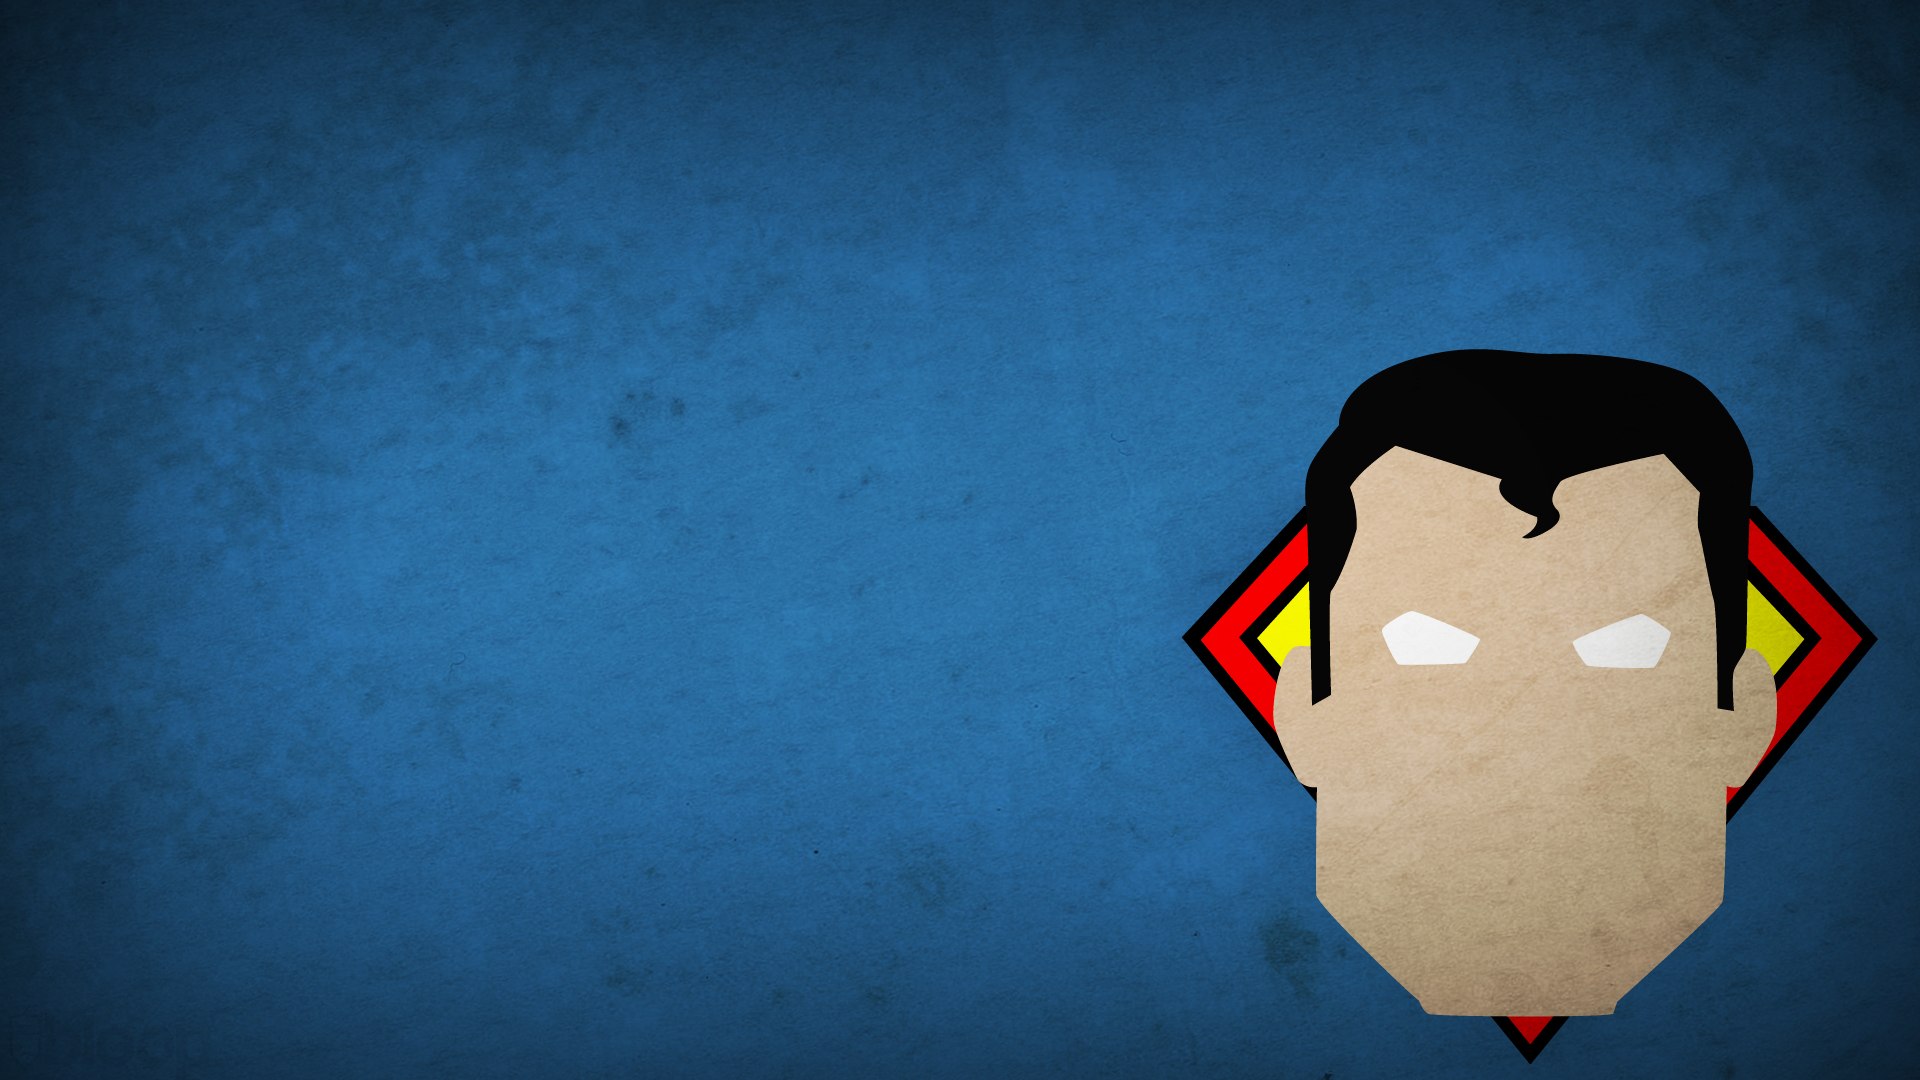 Superman minimal wallpaper 1920x1080 - - High Quality and other